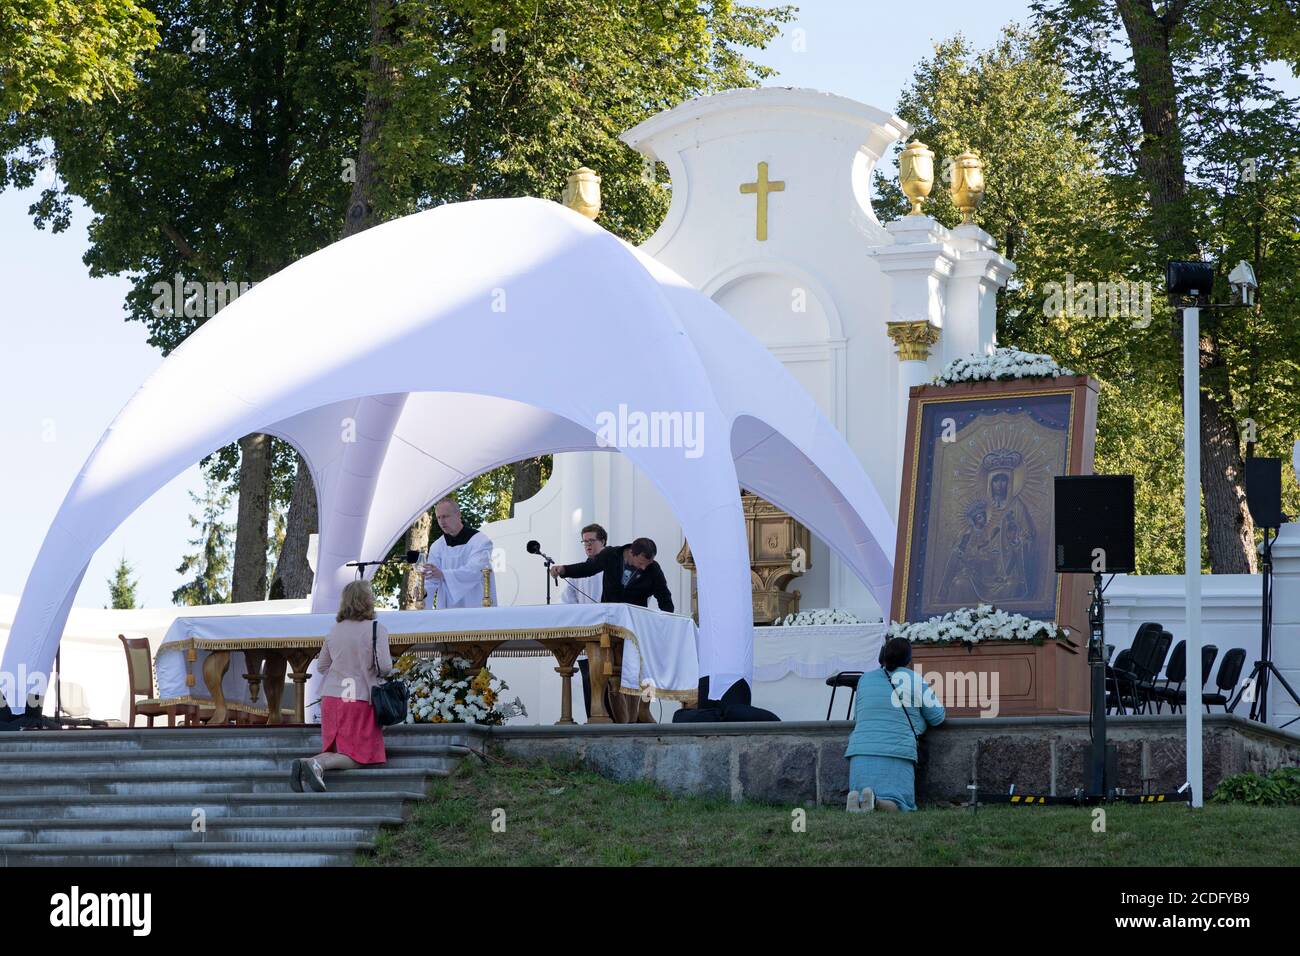 Members of the clergy prepare an outdoor altar to celebrate the Assumption of Mary (15 August) at Aglona Basilica in the Latgale region of Latvia. Stock Photo